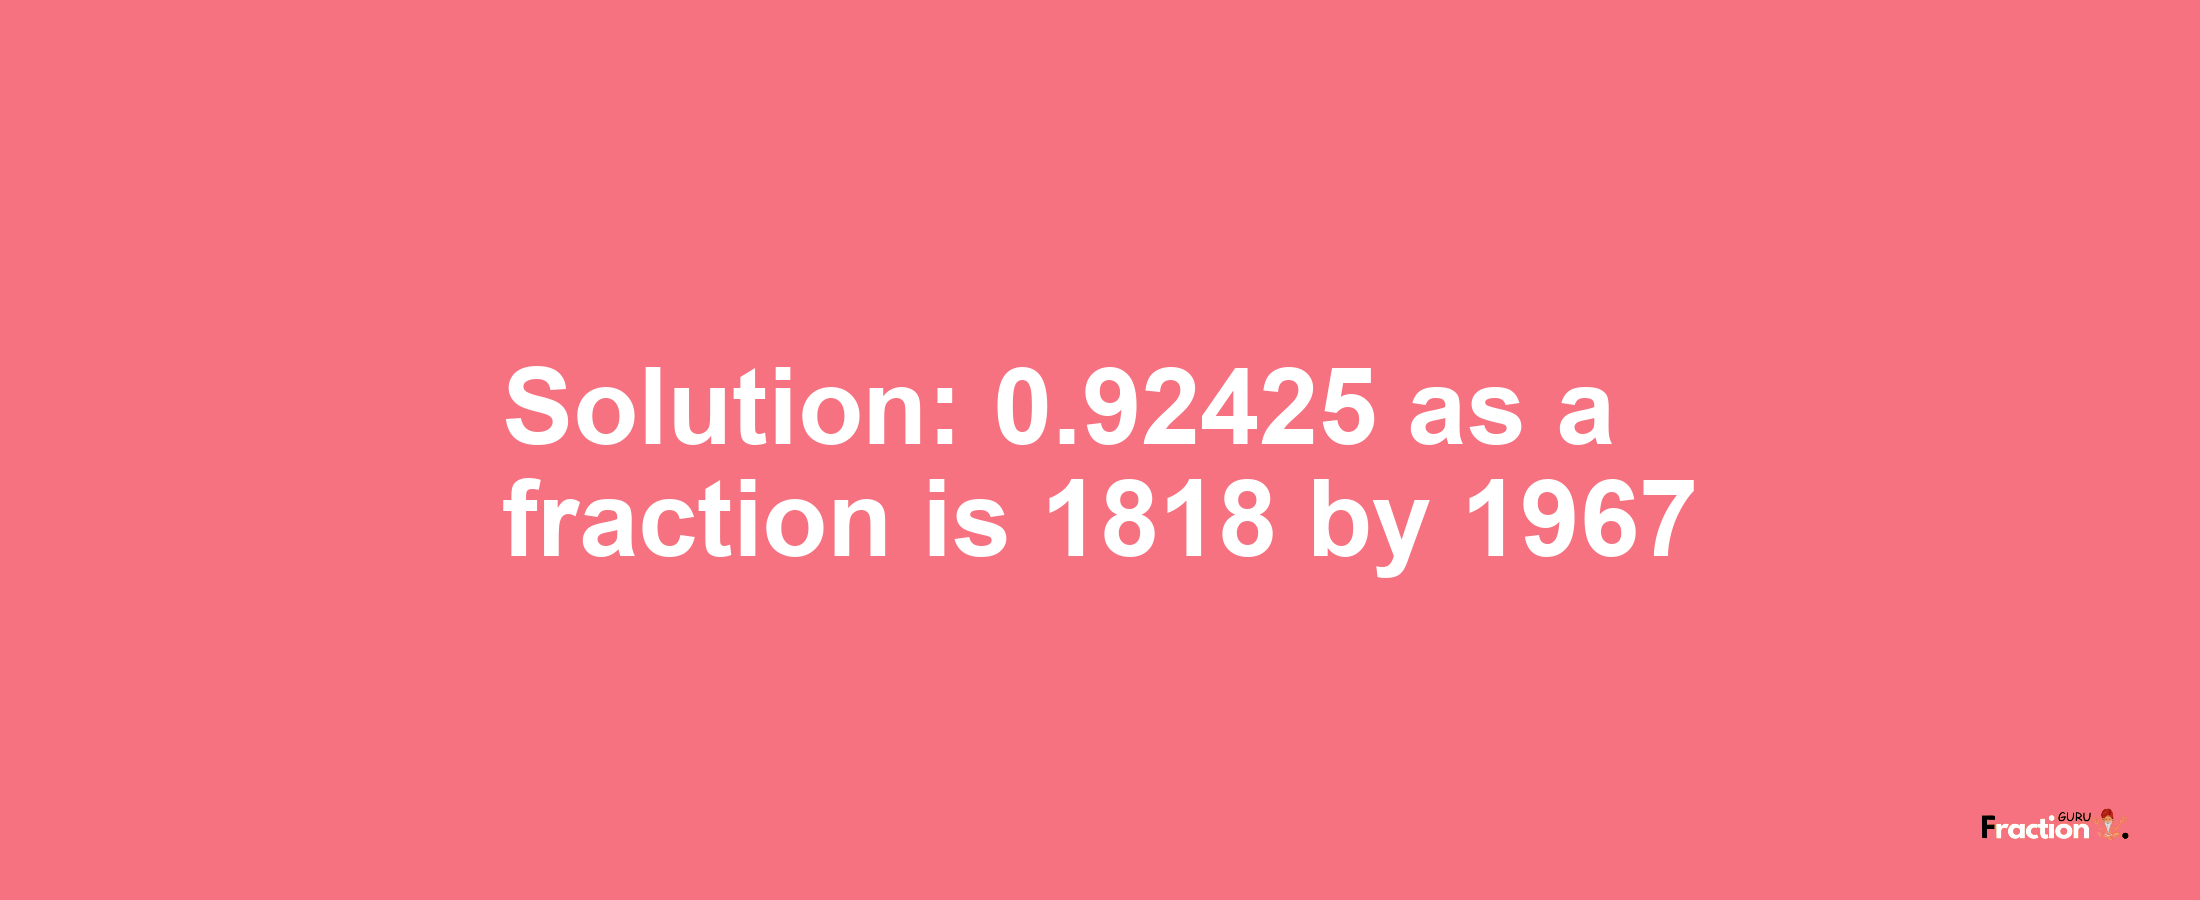 Solution:0.92425 as a fraction is 1818/1967